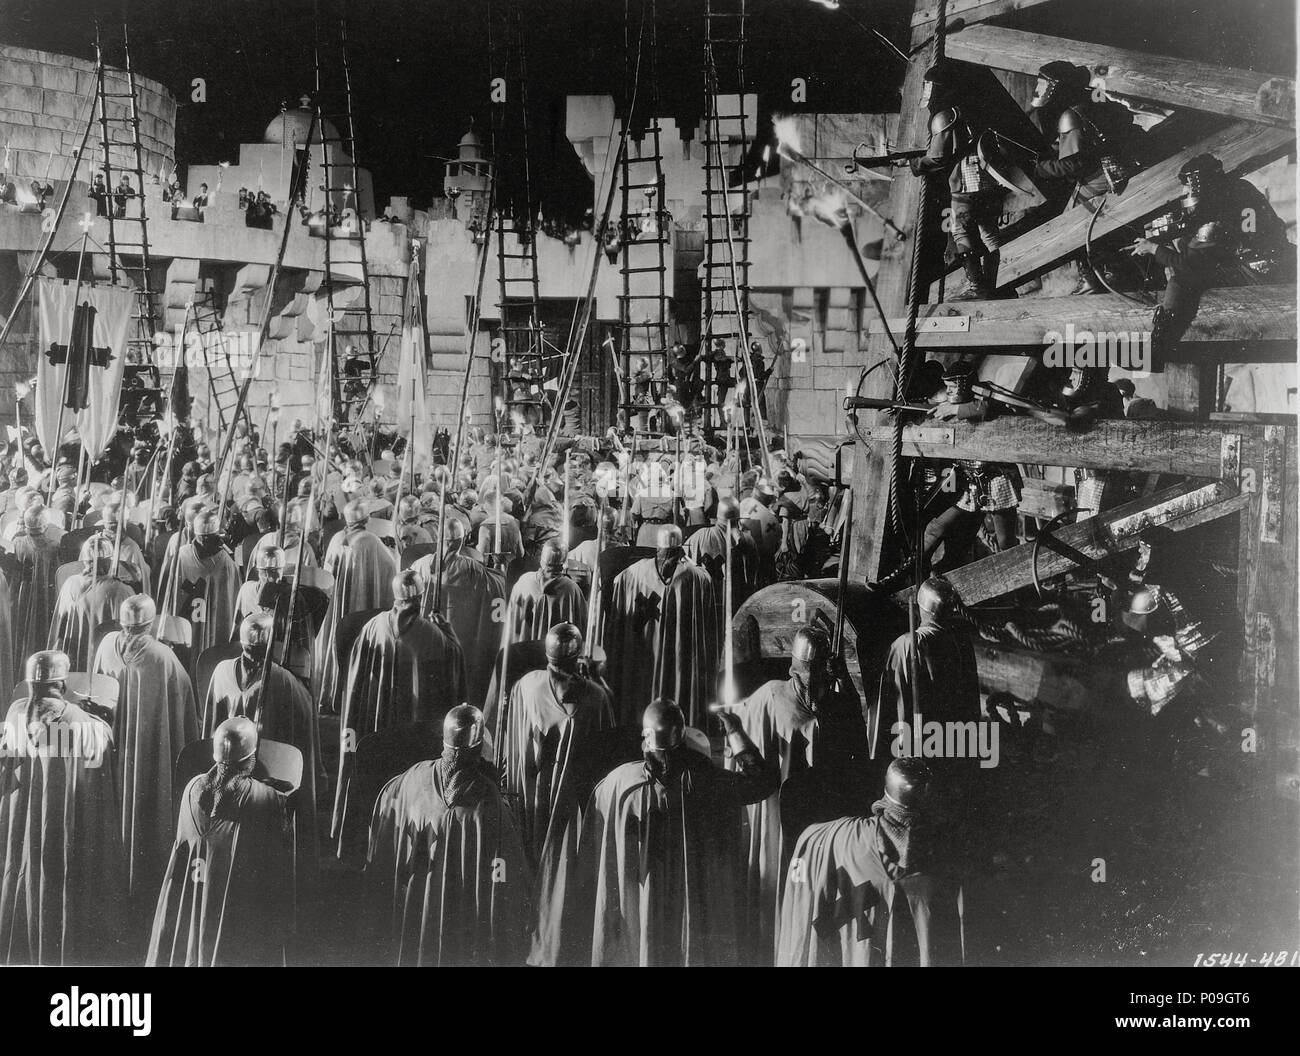 Original Film Title: THE CRUSADES.  English Title: THE CRUSADES.  Film Director: CECIL B DEMILLE.  Year: 1935. Credit: PARAMOUNT PICTURES / Album Stock Photo